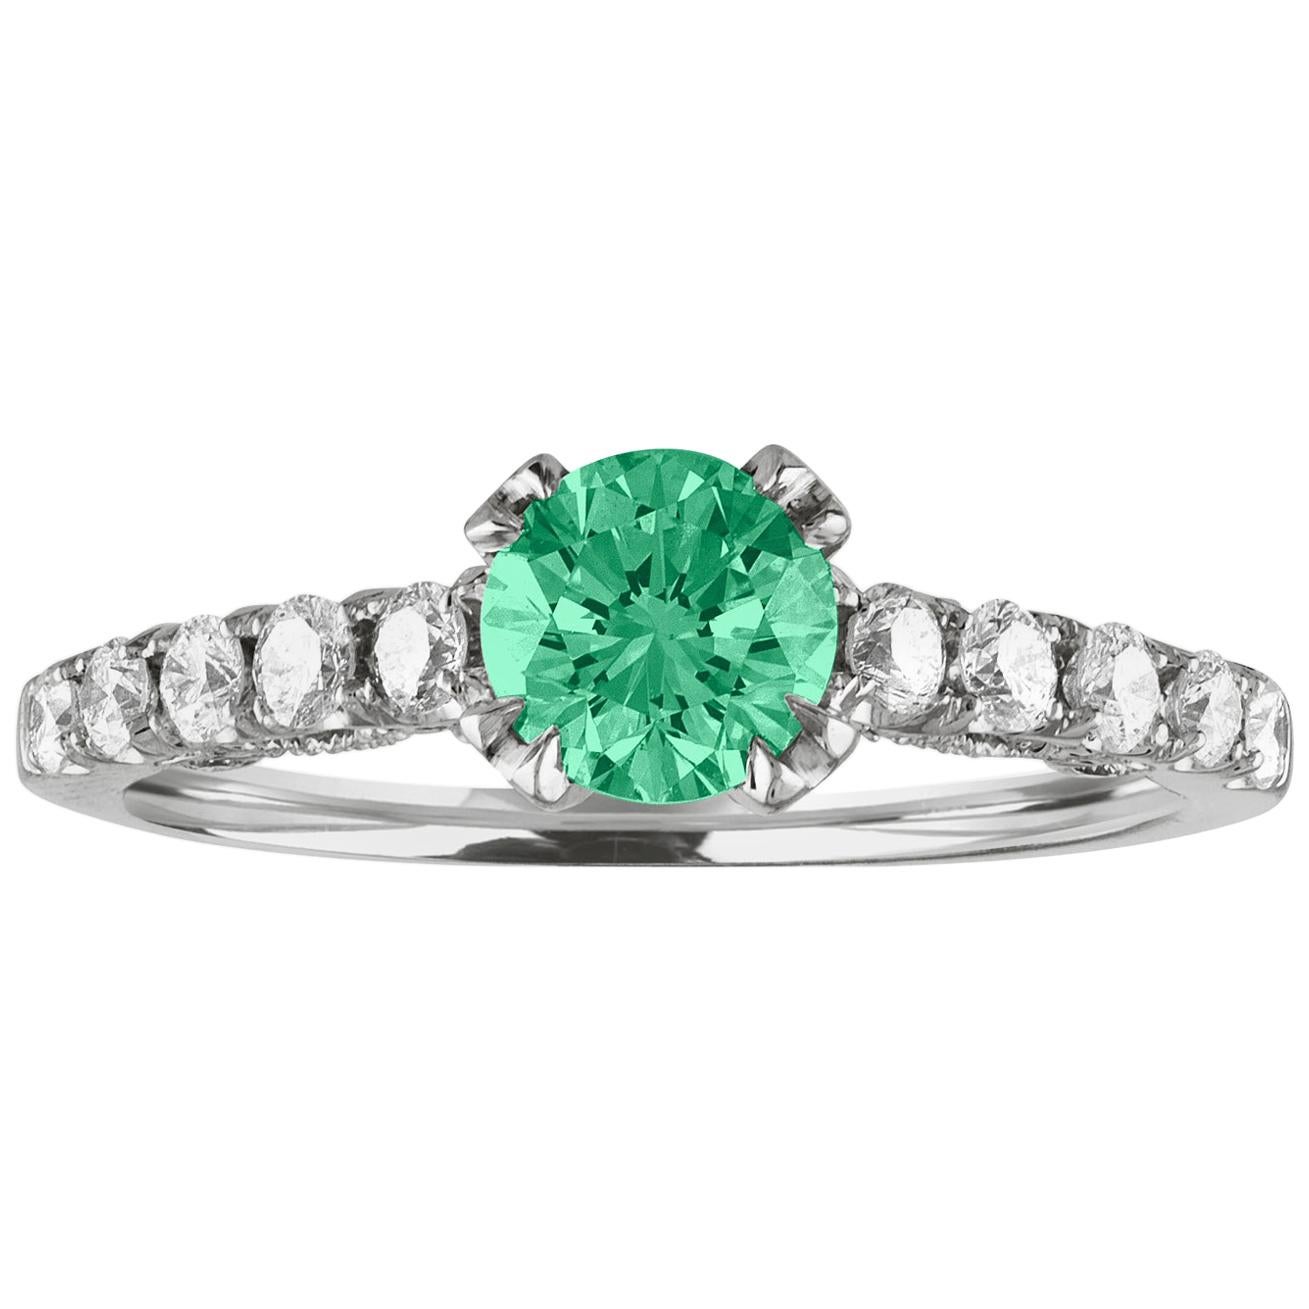 Beautiful Diamond & Emerald Milgrain Ring
The ring is 18K White Gold.
There are 0.55 Carats in Diamonds F/G VS/SI
The Center is Round 0.52 Carat Emerald.
The Emerald is AGL certified.
The ring is a size 6.50, sizable.
The ring weighs 2.8 grams.